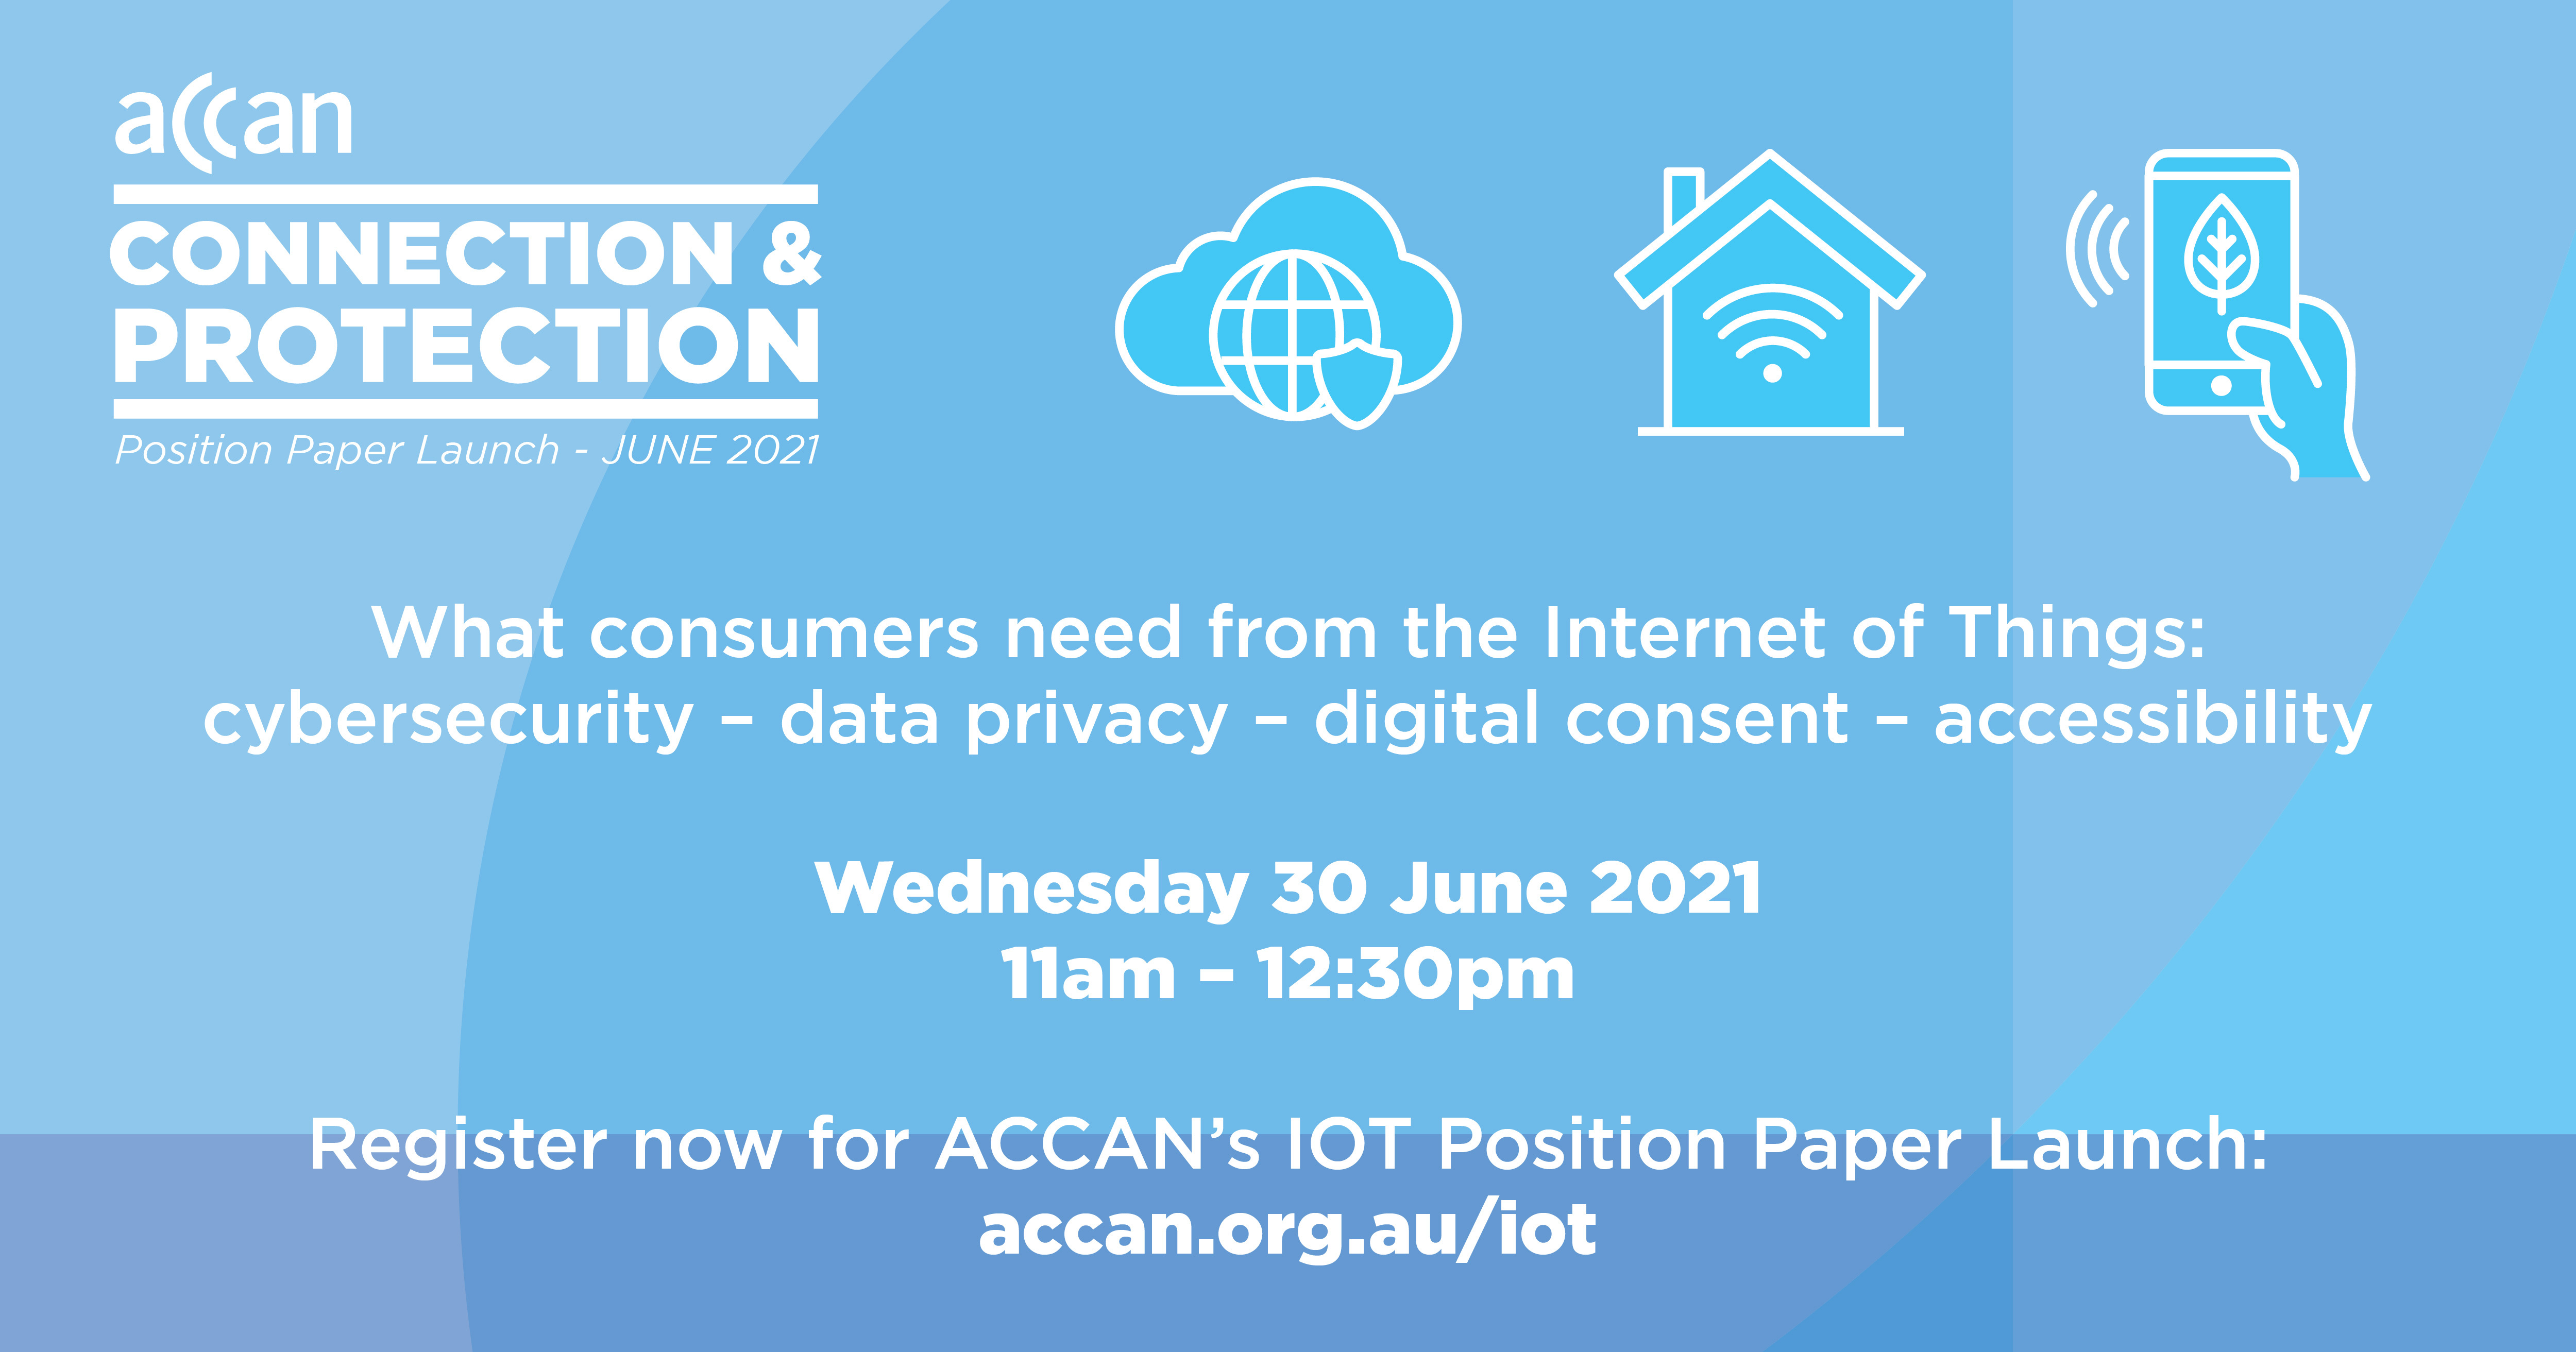 COnnection & Protection Banner: What consumers need from the Internet of Things 